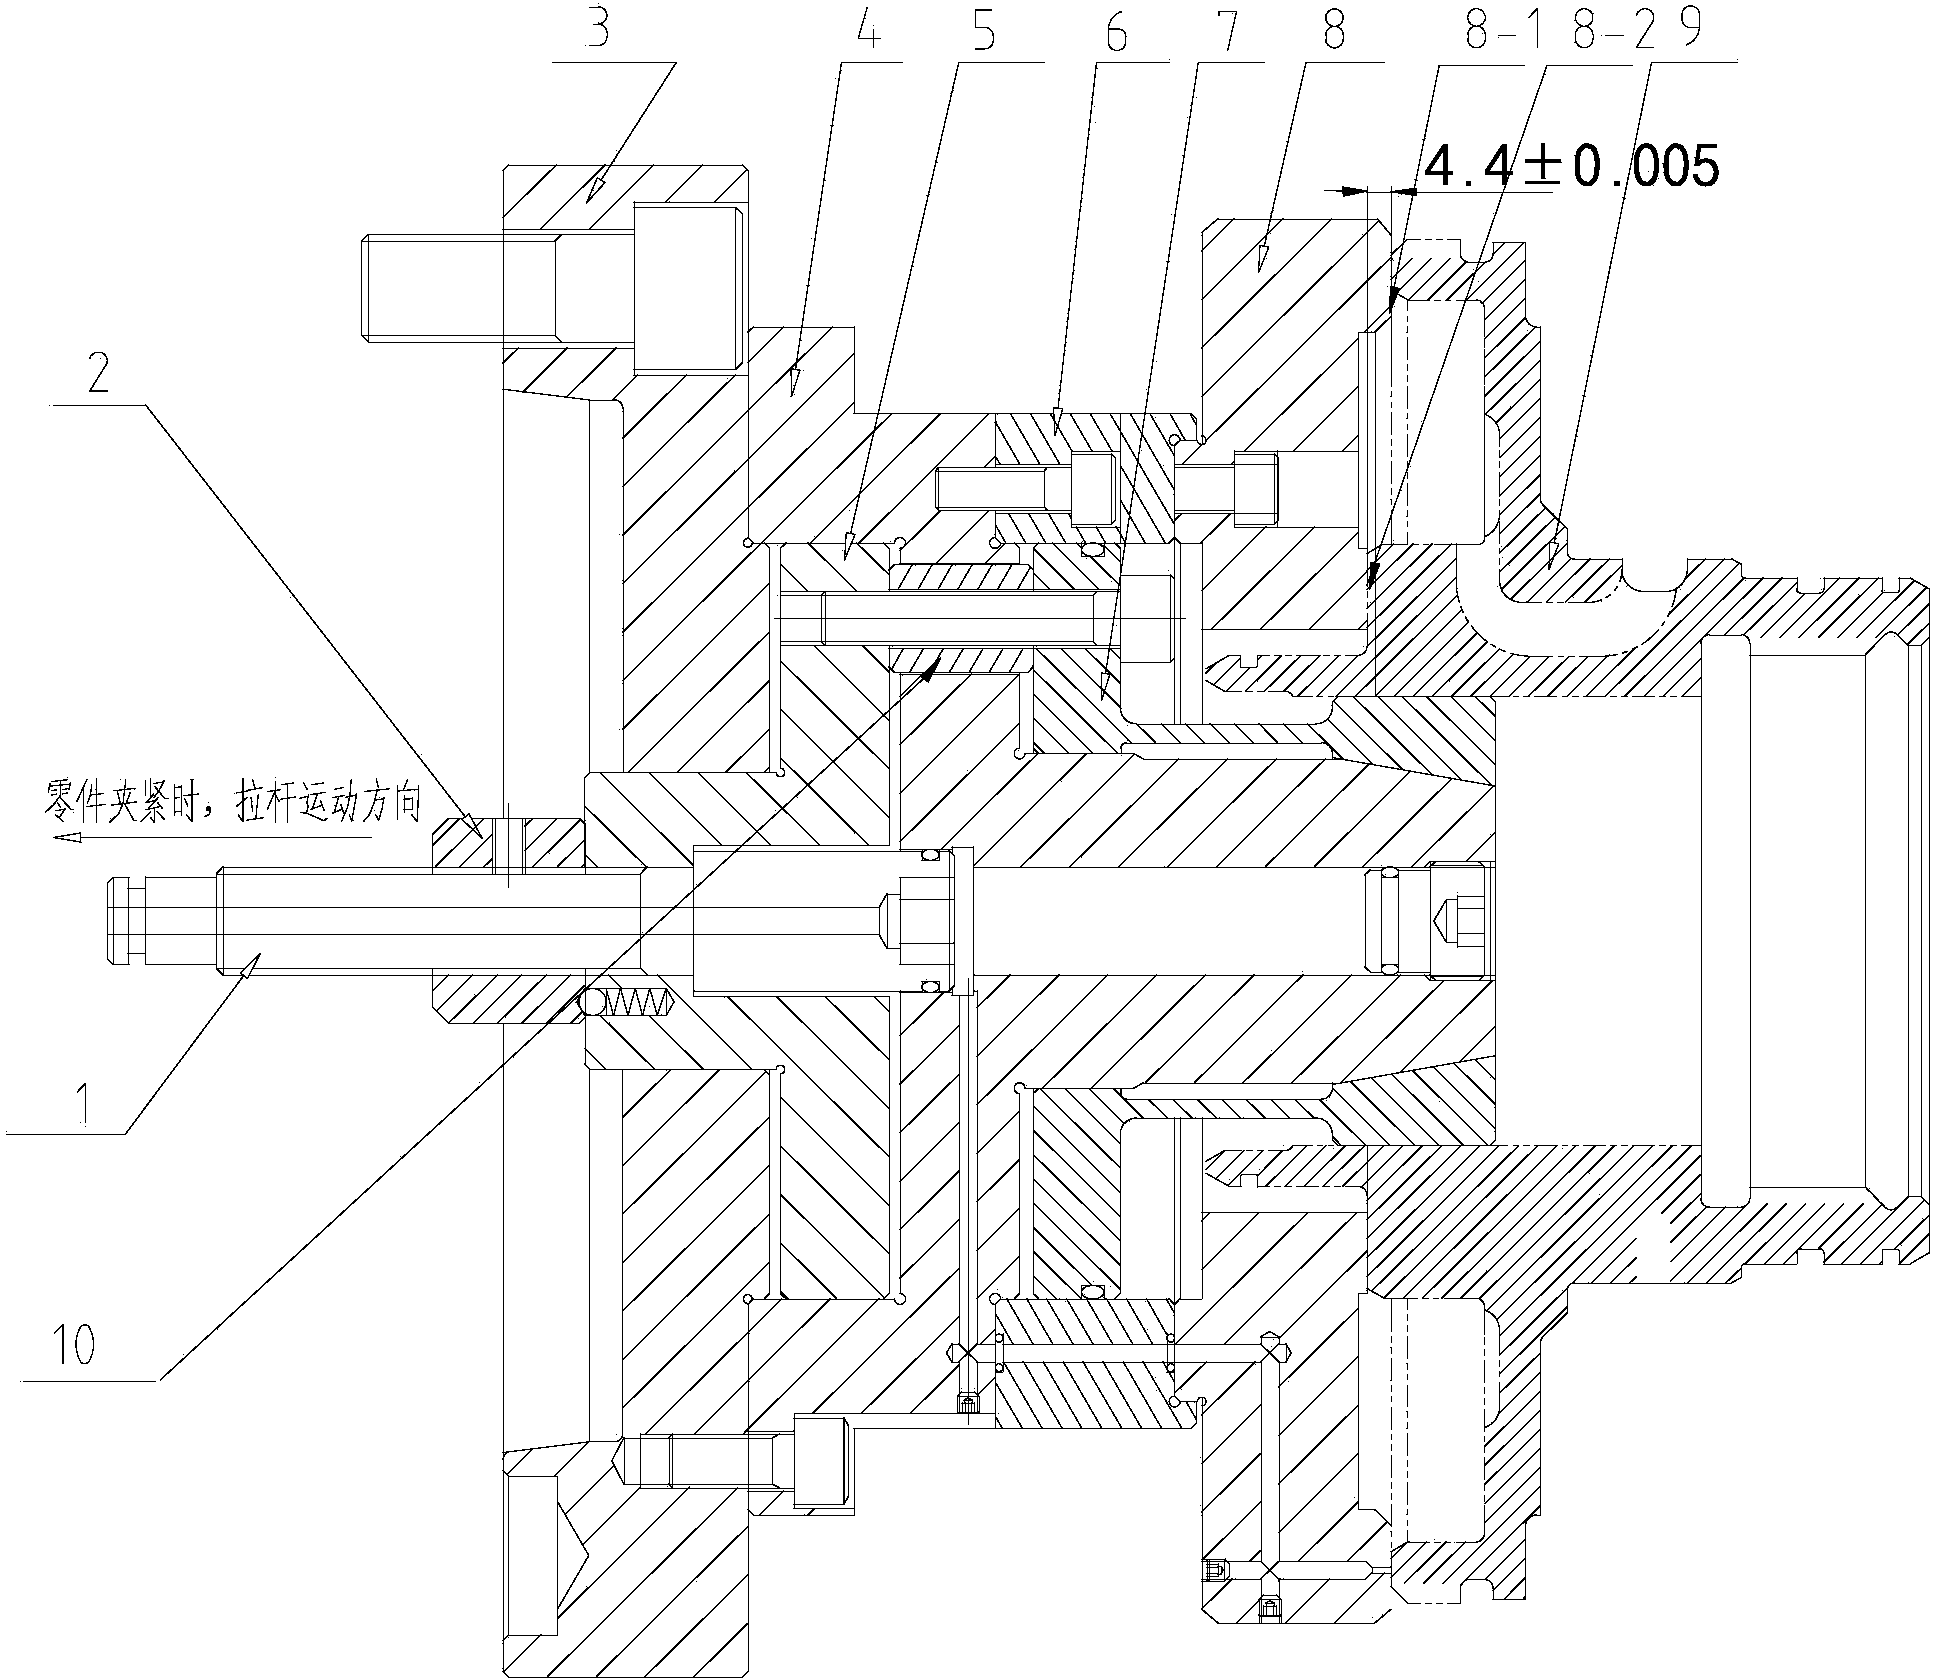 Double-end-face over-locating fixture